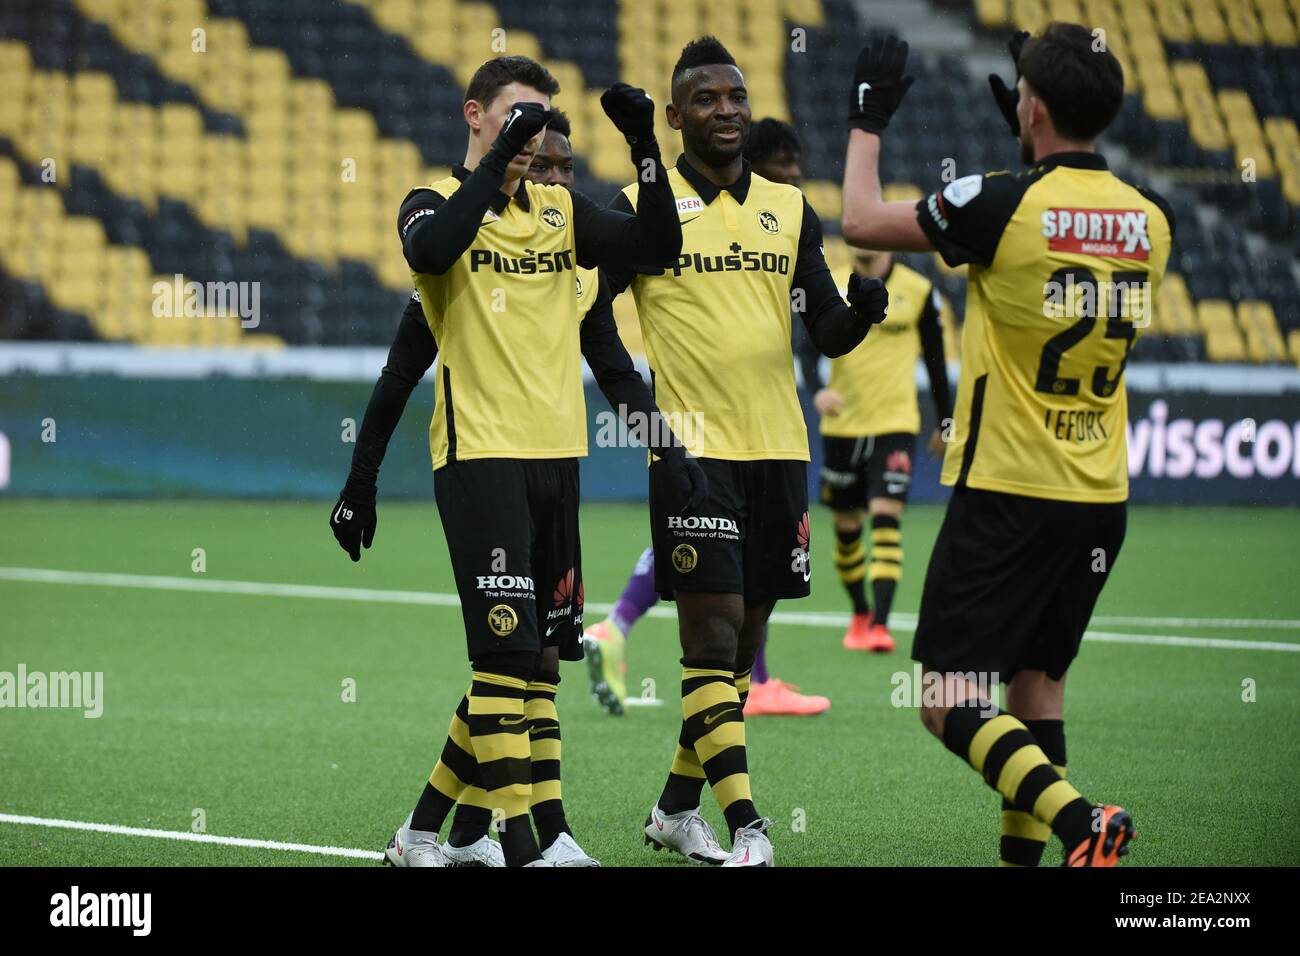 Bern, Wankdorf, Soccer Super League: BSC Young Boys - FC Lausanne-Sport, #  18 Jean-Pierre Nsame (Young Boys) and # 25, Jordan. 07th Feb, 2021. Lefort  (Young Boys) congratulate # 16 Christian Fassnacht (